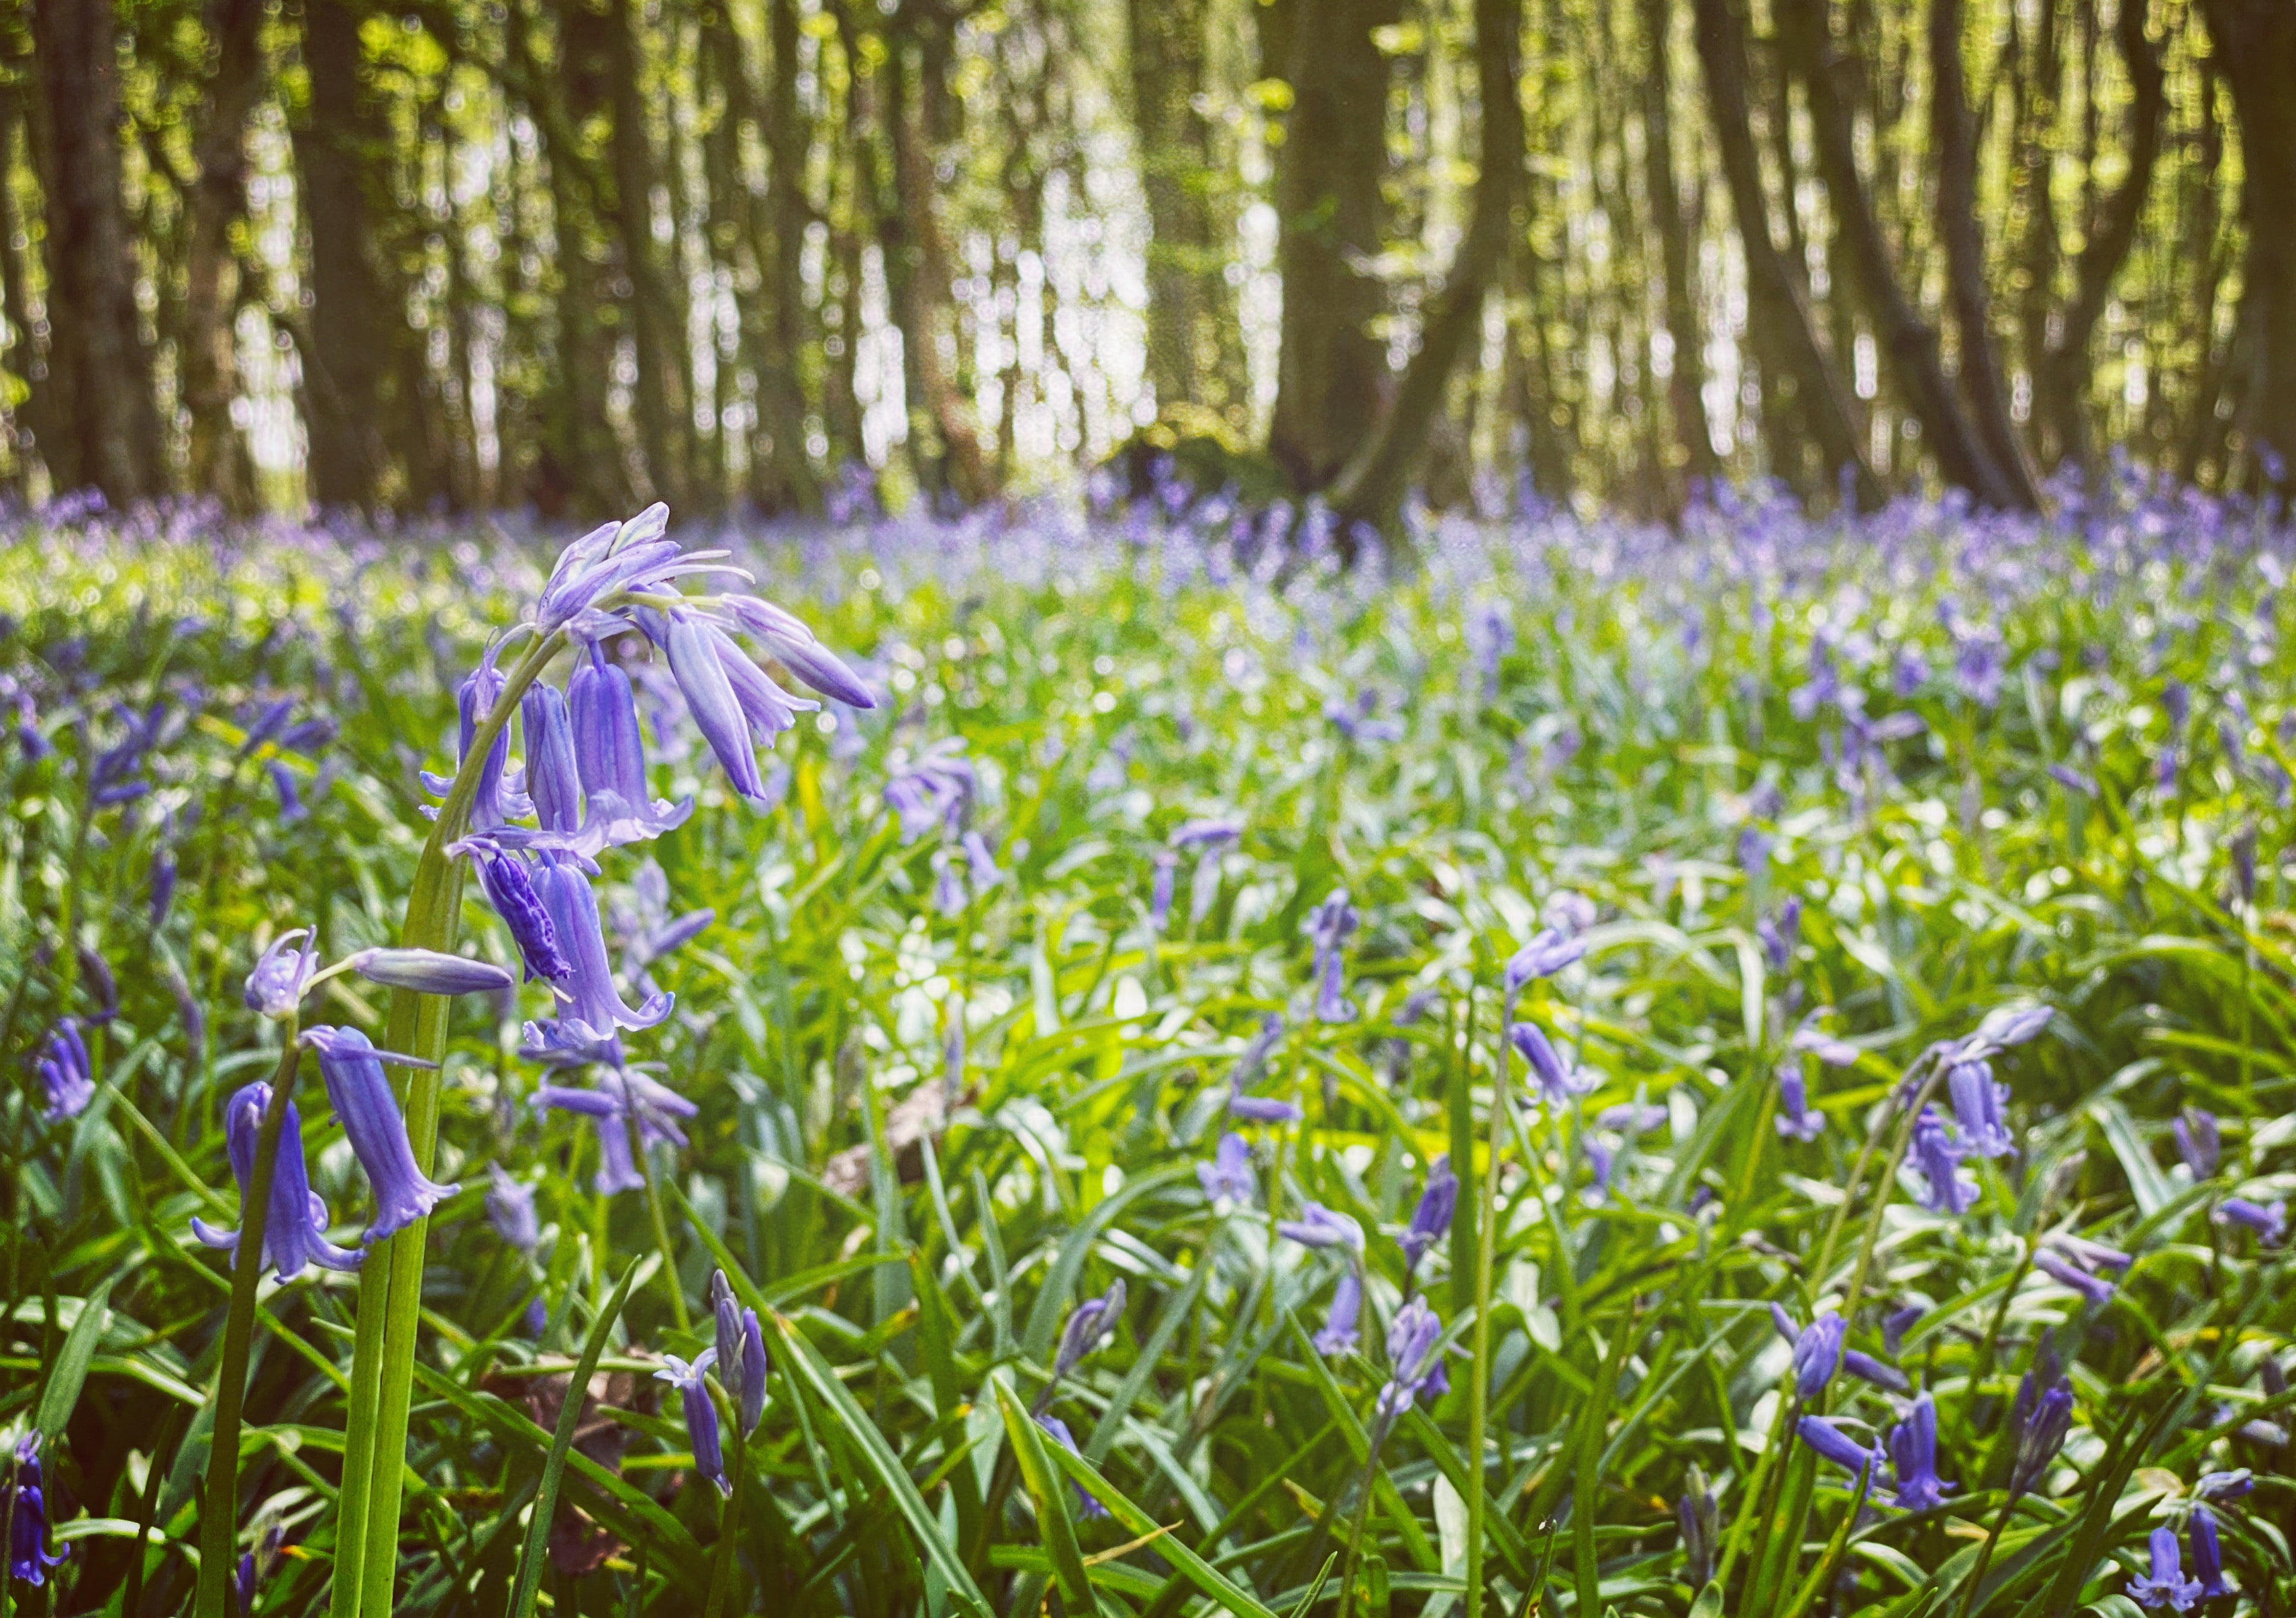 Bluebells and anemones turn the forest floor into a sea of colour